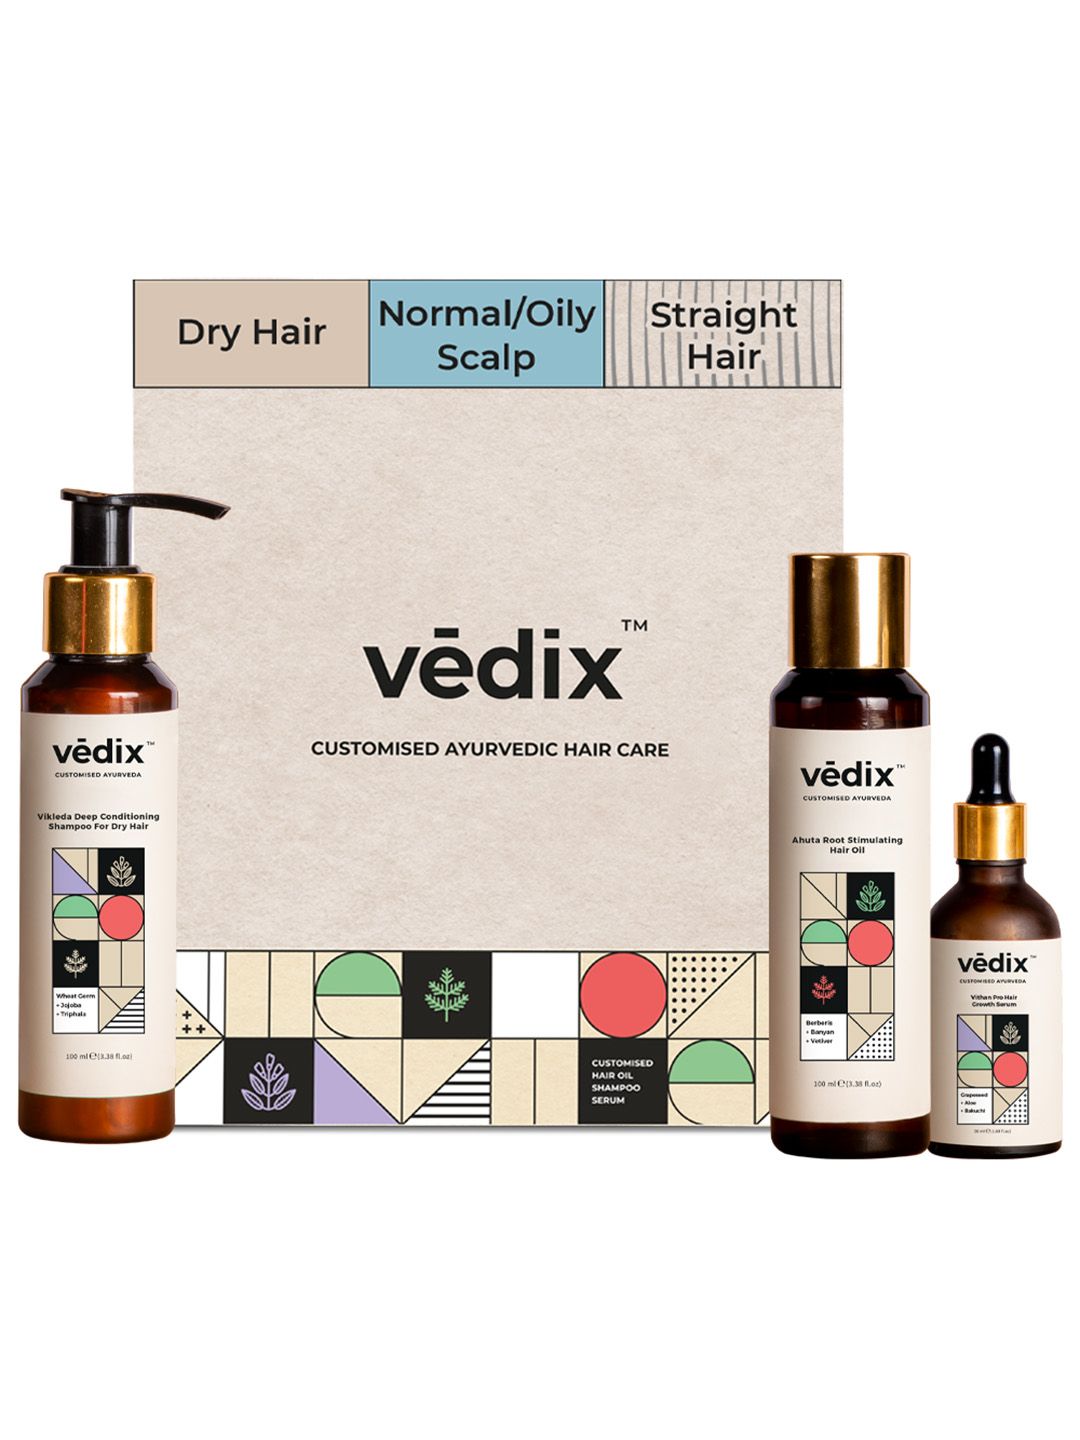 VEDIX Customized Hair Fall Control Regimen for Dry Hair-Normal/Oily Scalp & Straight Hair Price in India